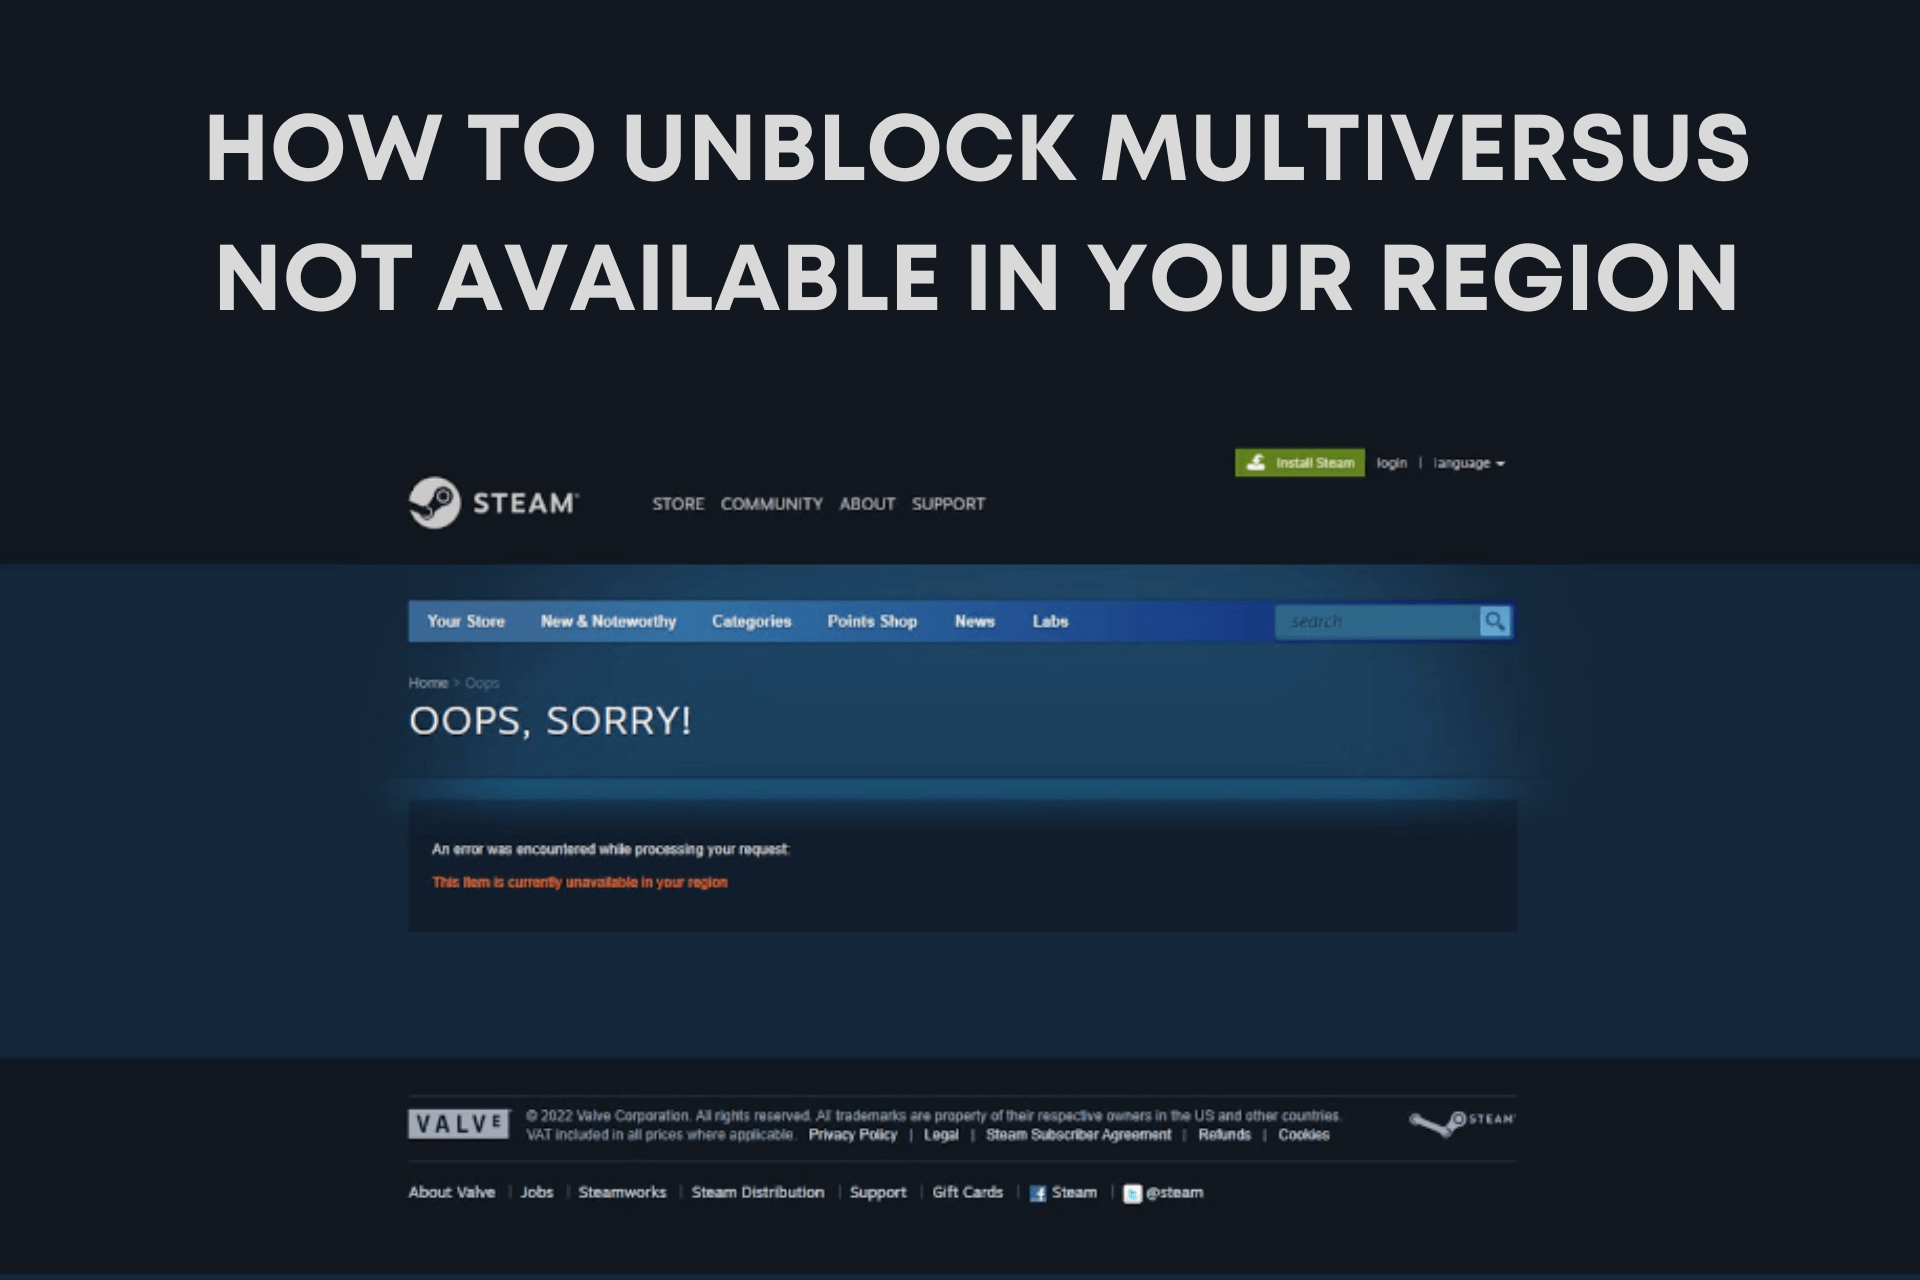 MultiVersus not available in your region